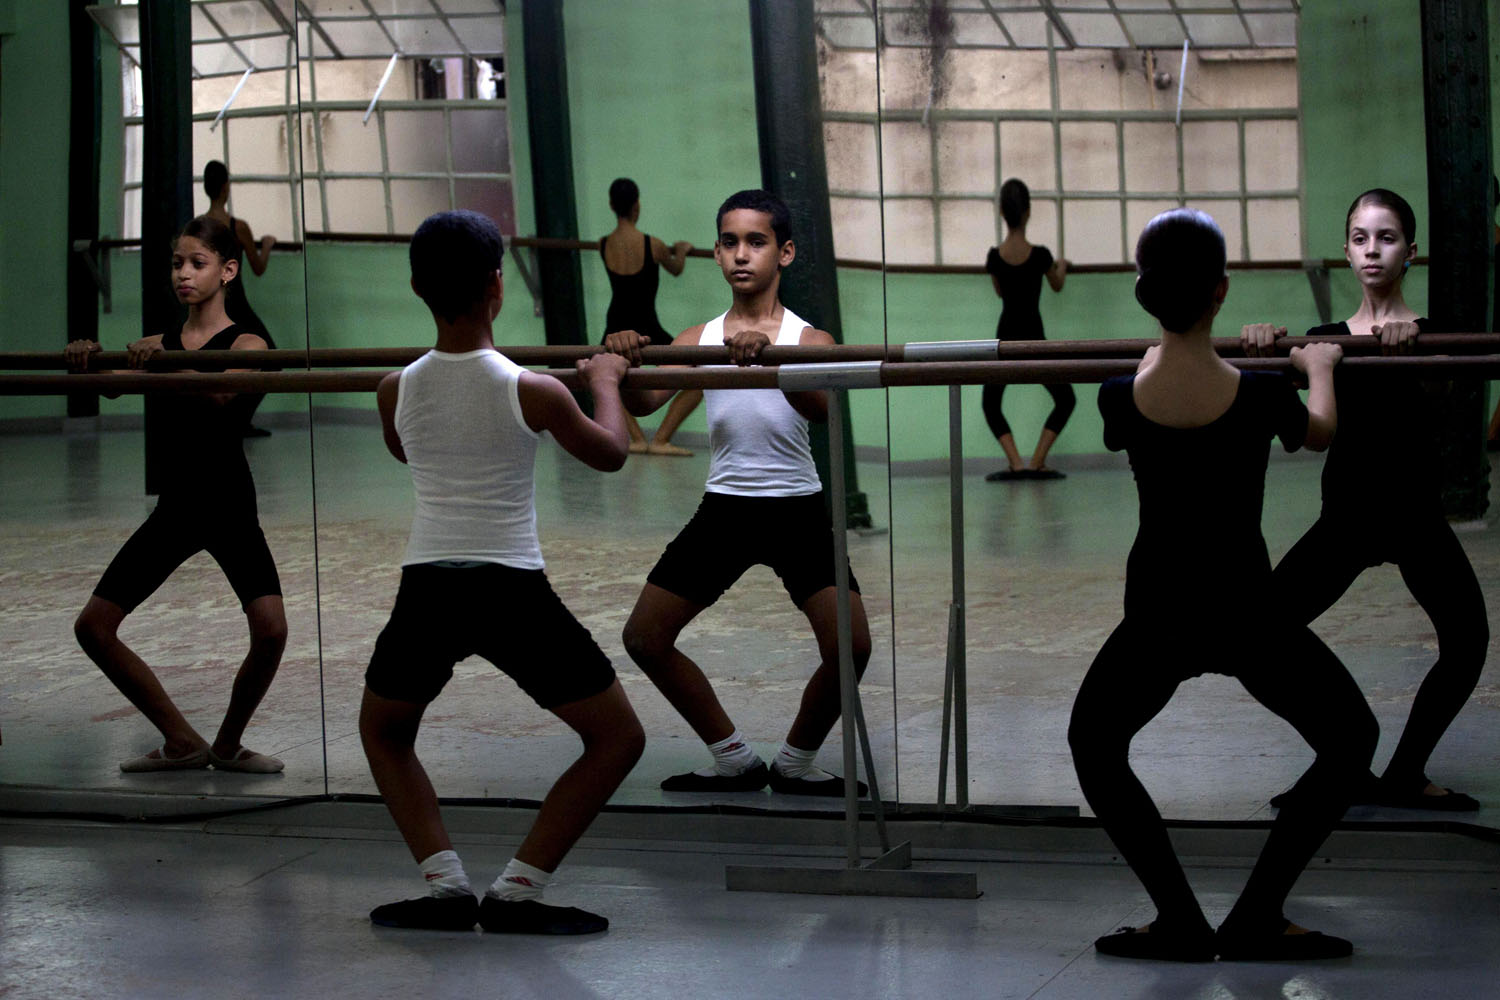 Image: Nov. 5, 2012. Students practice during a ballet class at Lizt Alfonso school in Old Havana.